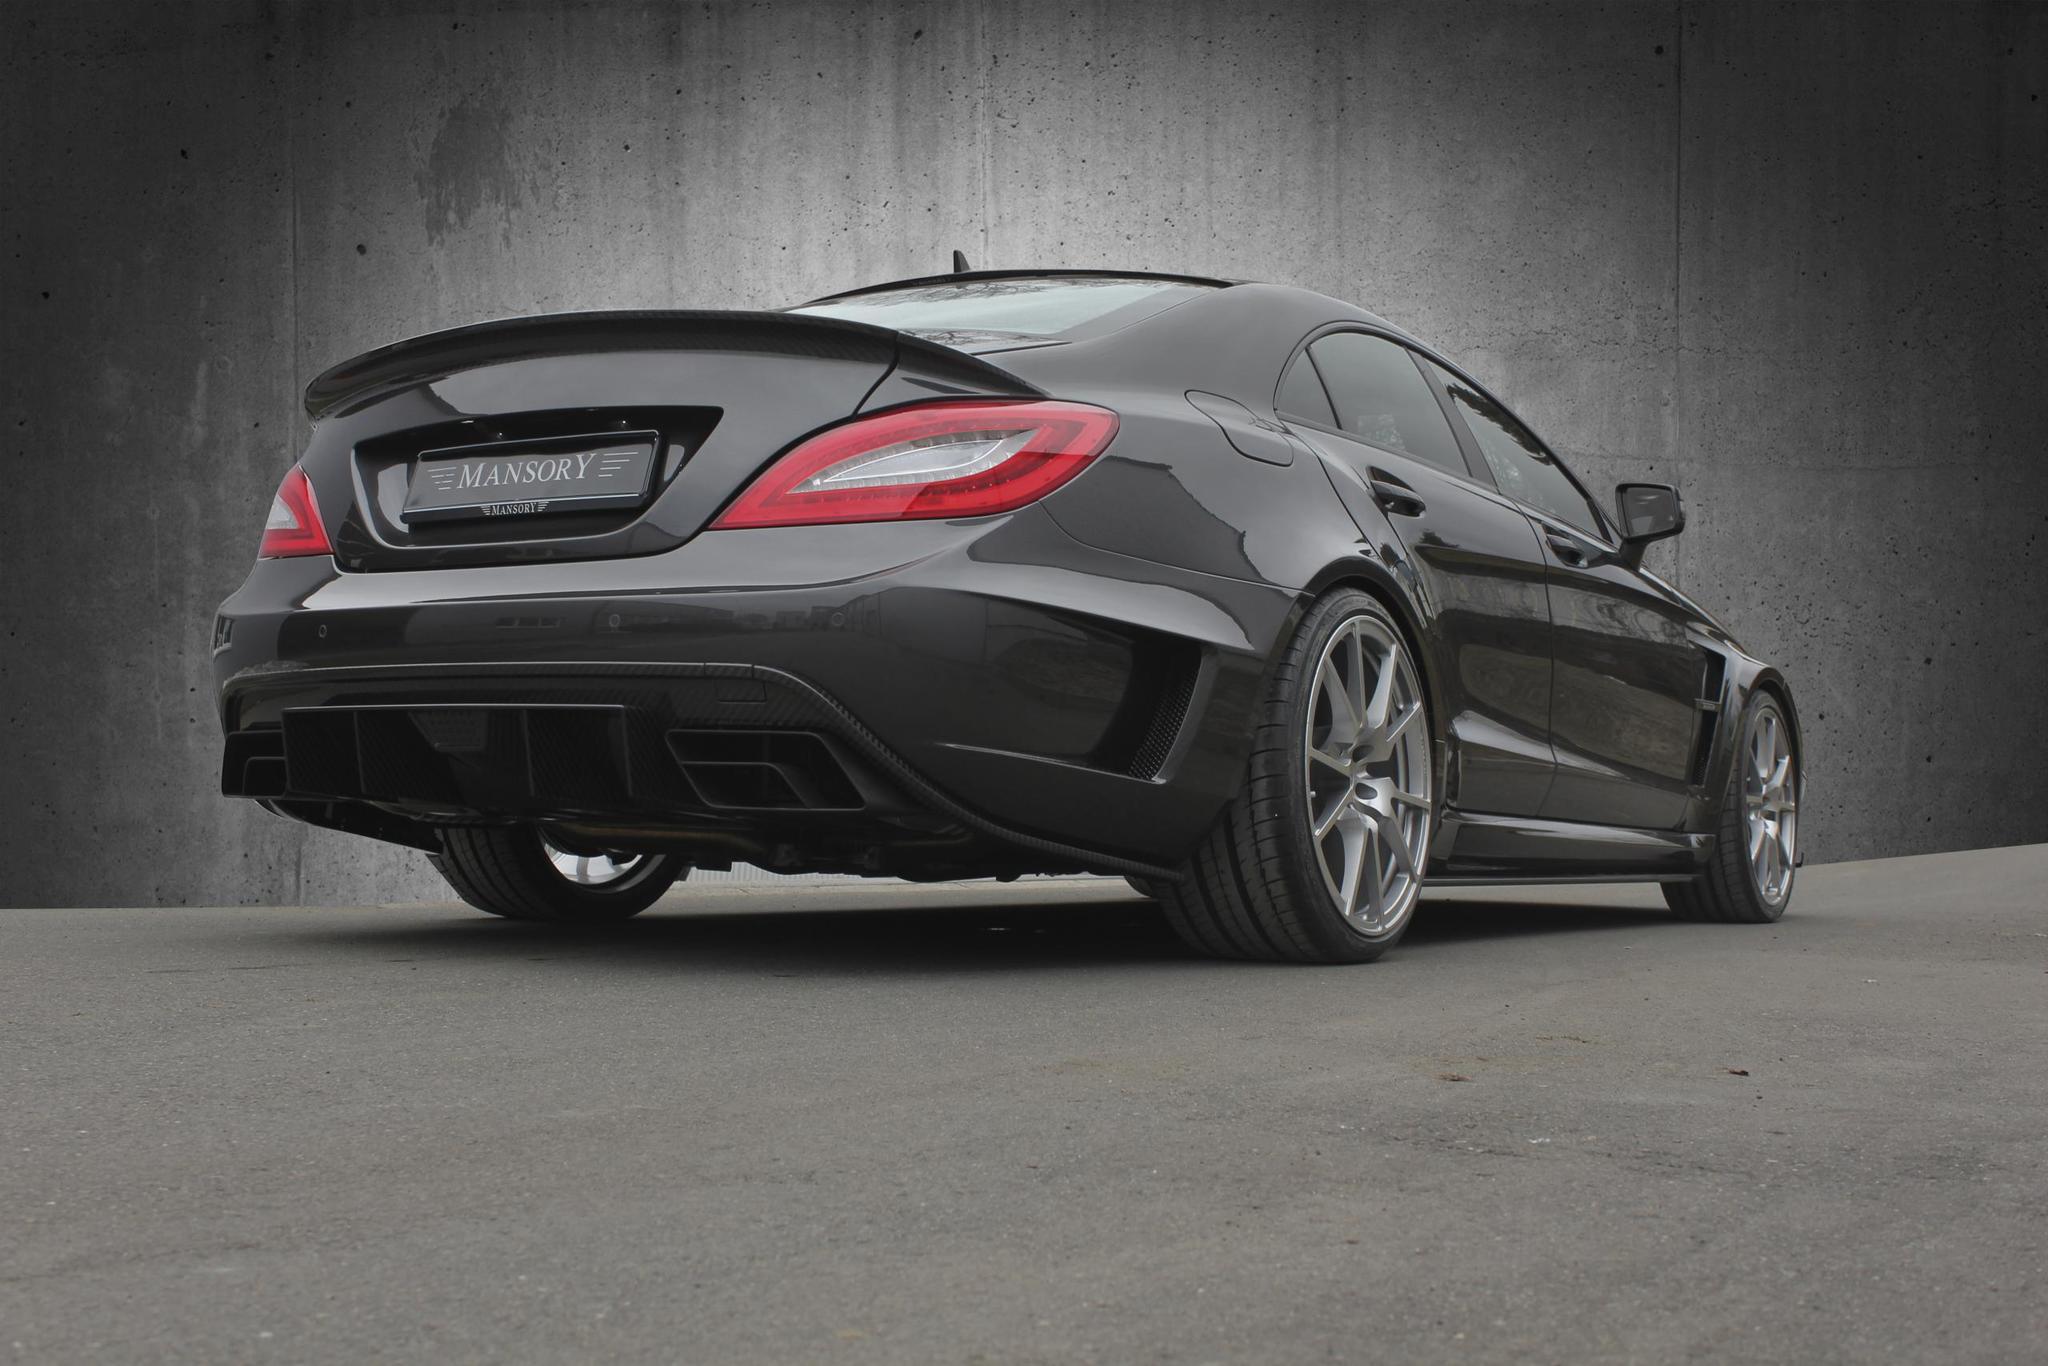 Mansory body kit for Mercedes-Benz CLS new model